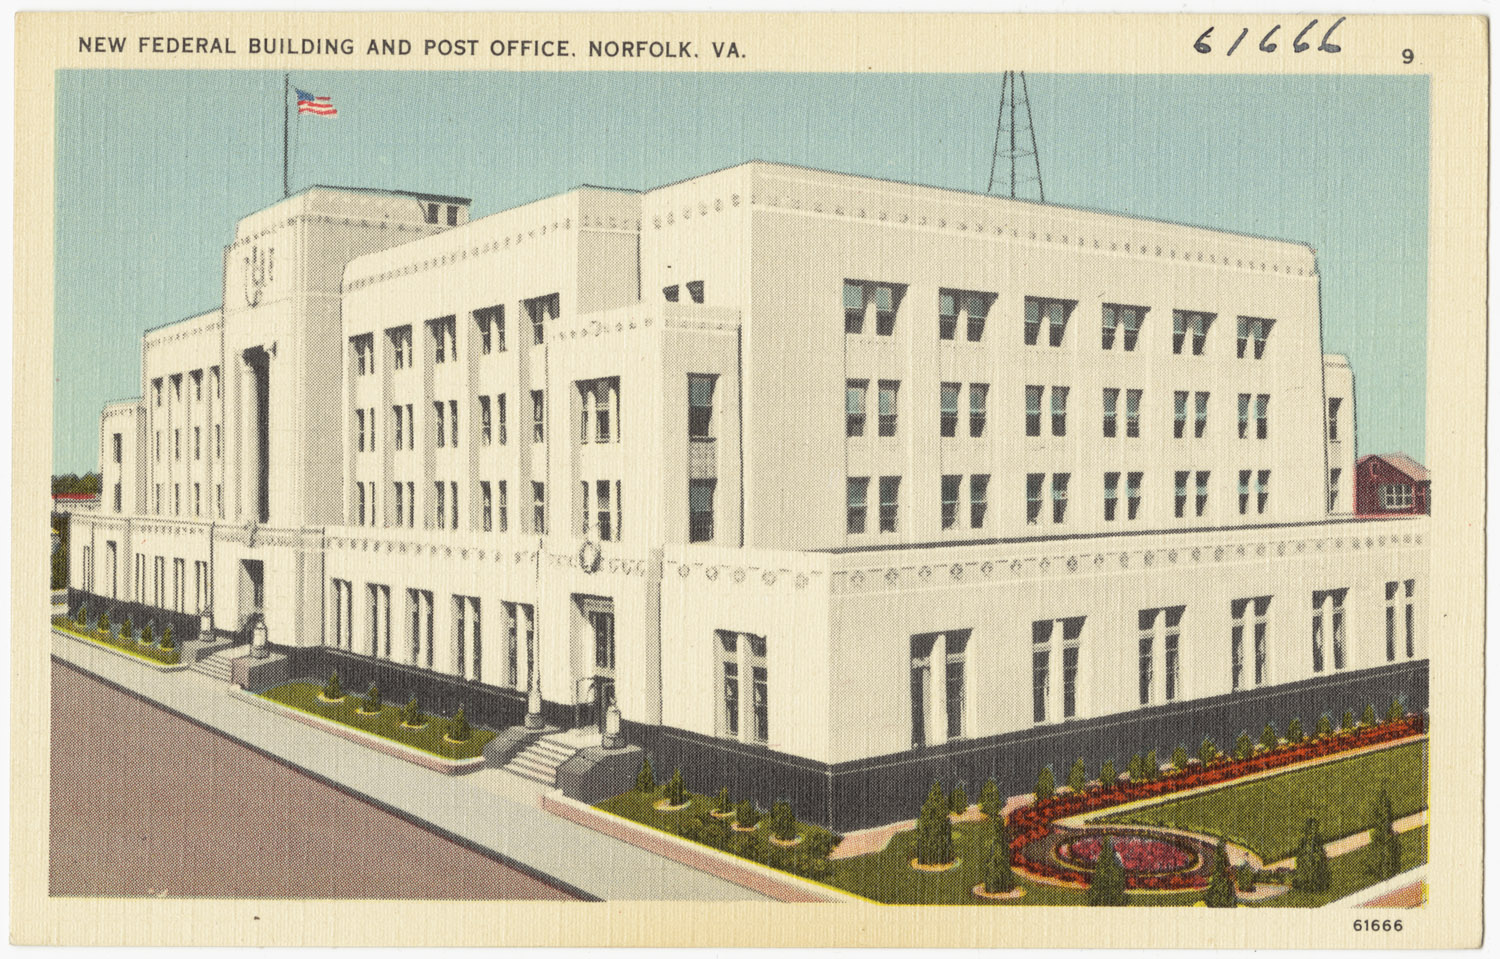 this postcard shows a large white building that has an american flag on the top